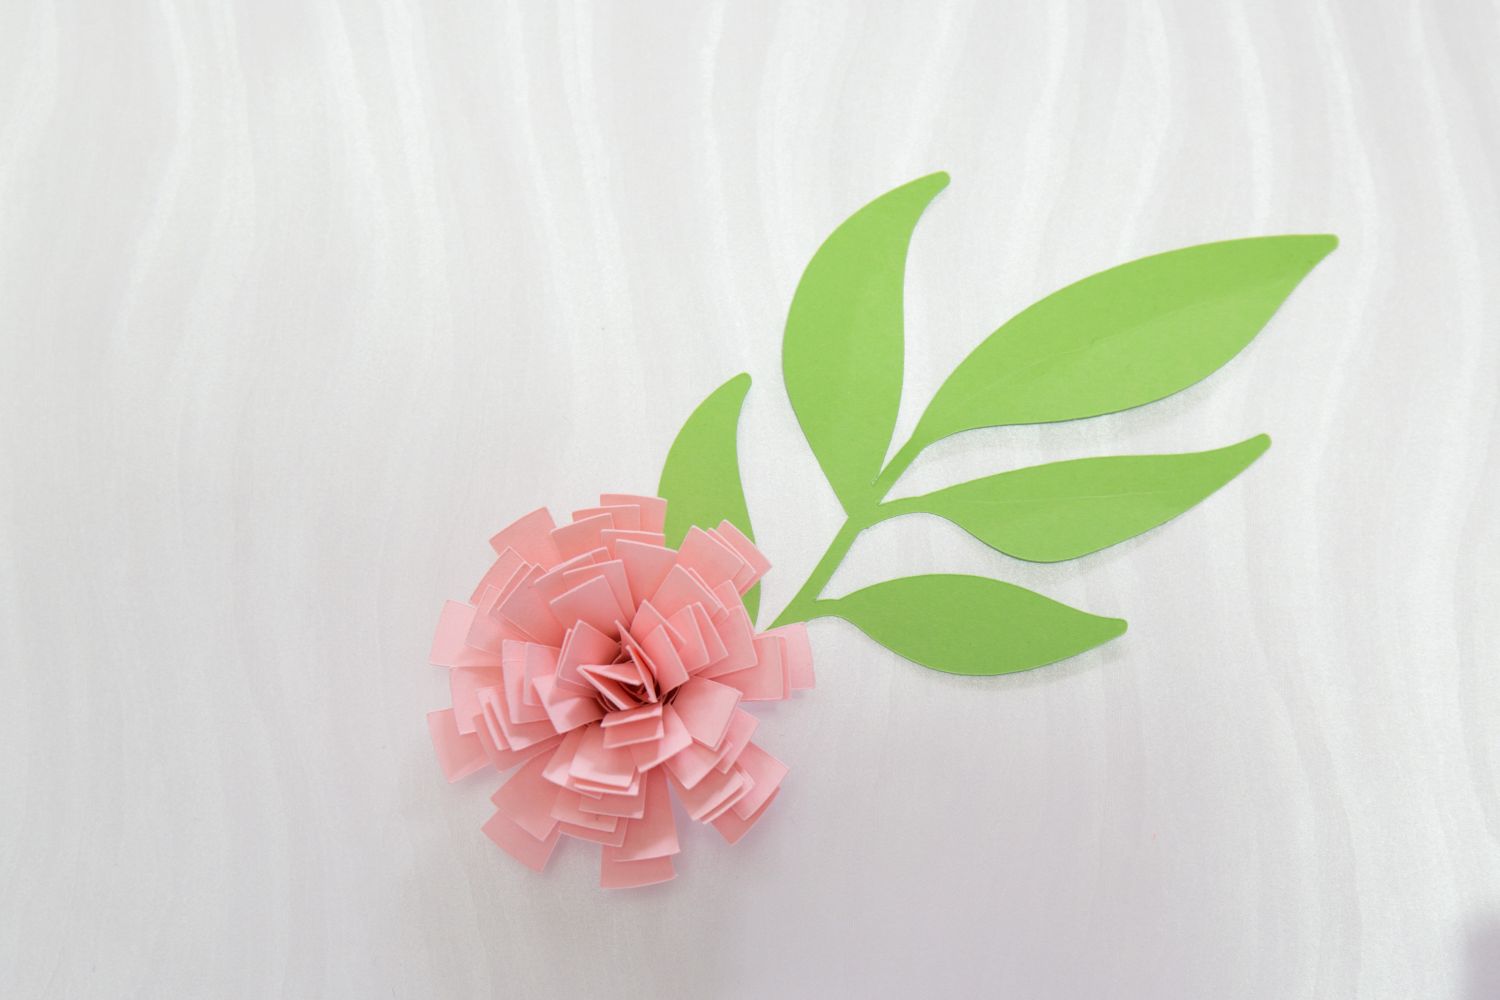 Download 9 rolled paper flower svg for 3D rolled flowers with ...